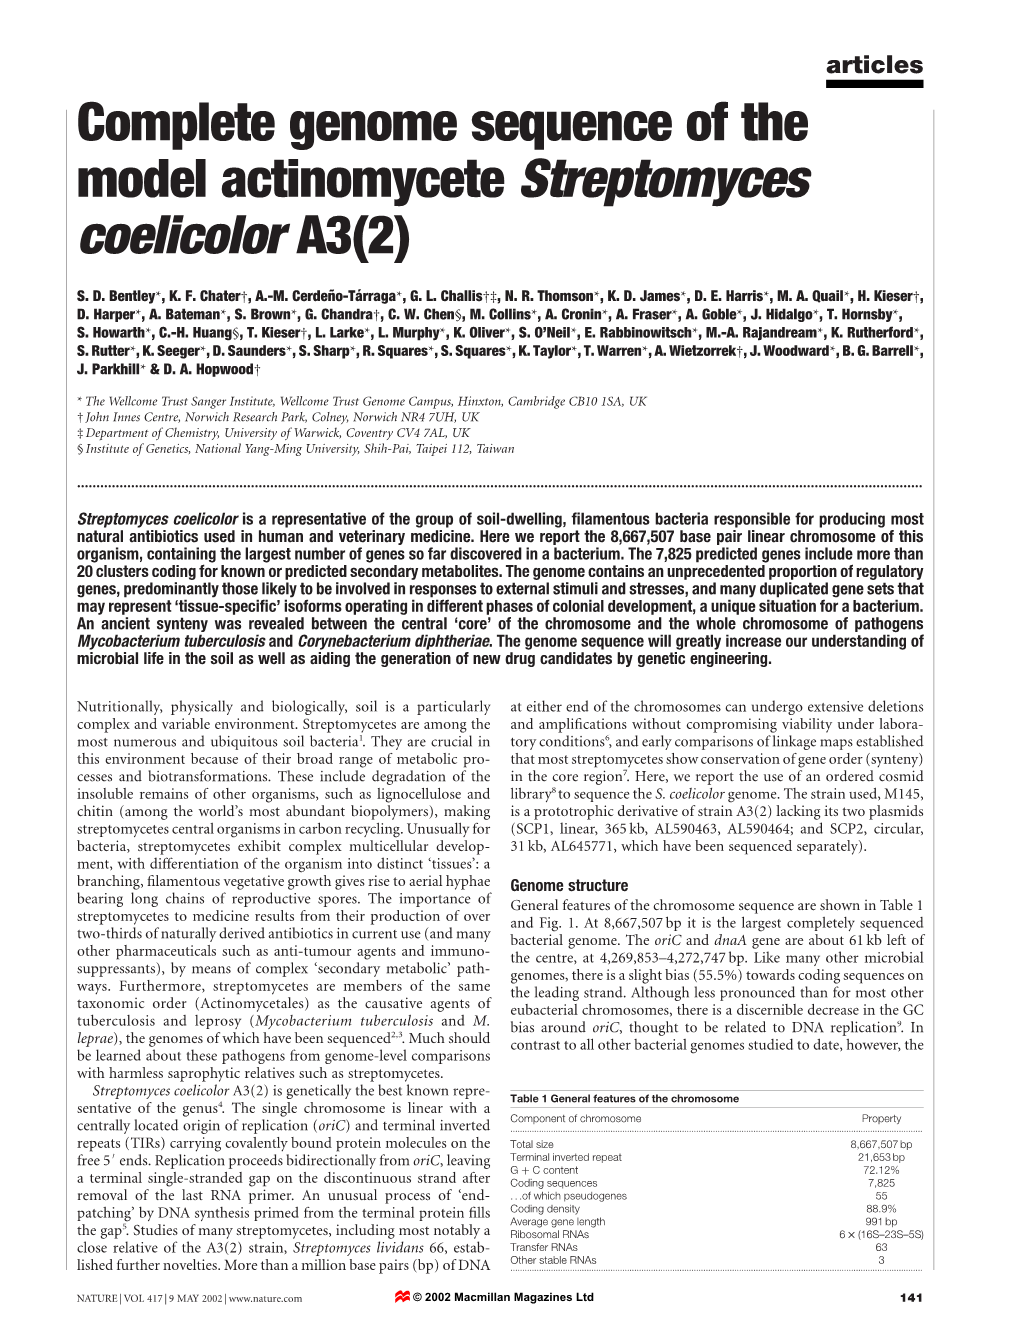 Complete Genome Sequence of the Model Actinomycete Streptomyces Coelicolor A3(2)